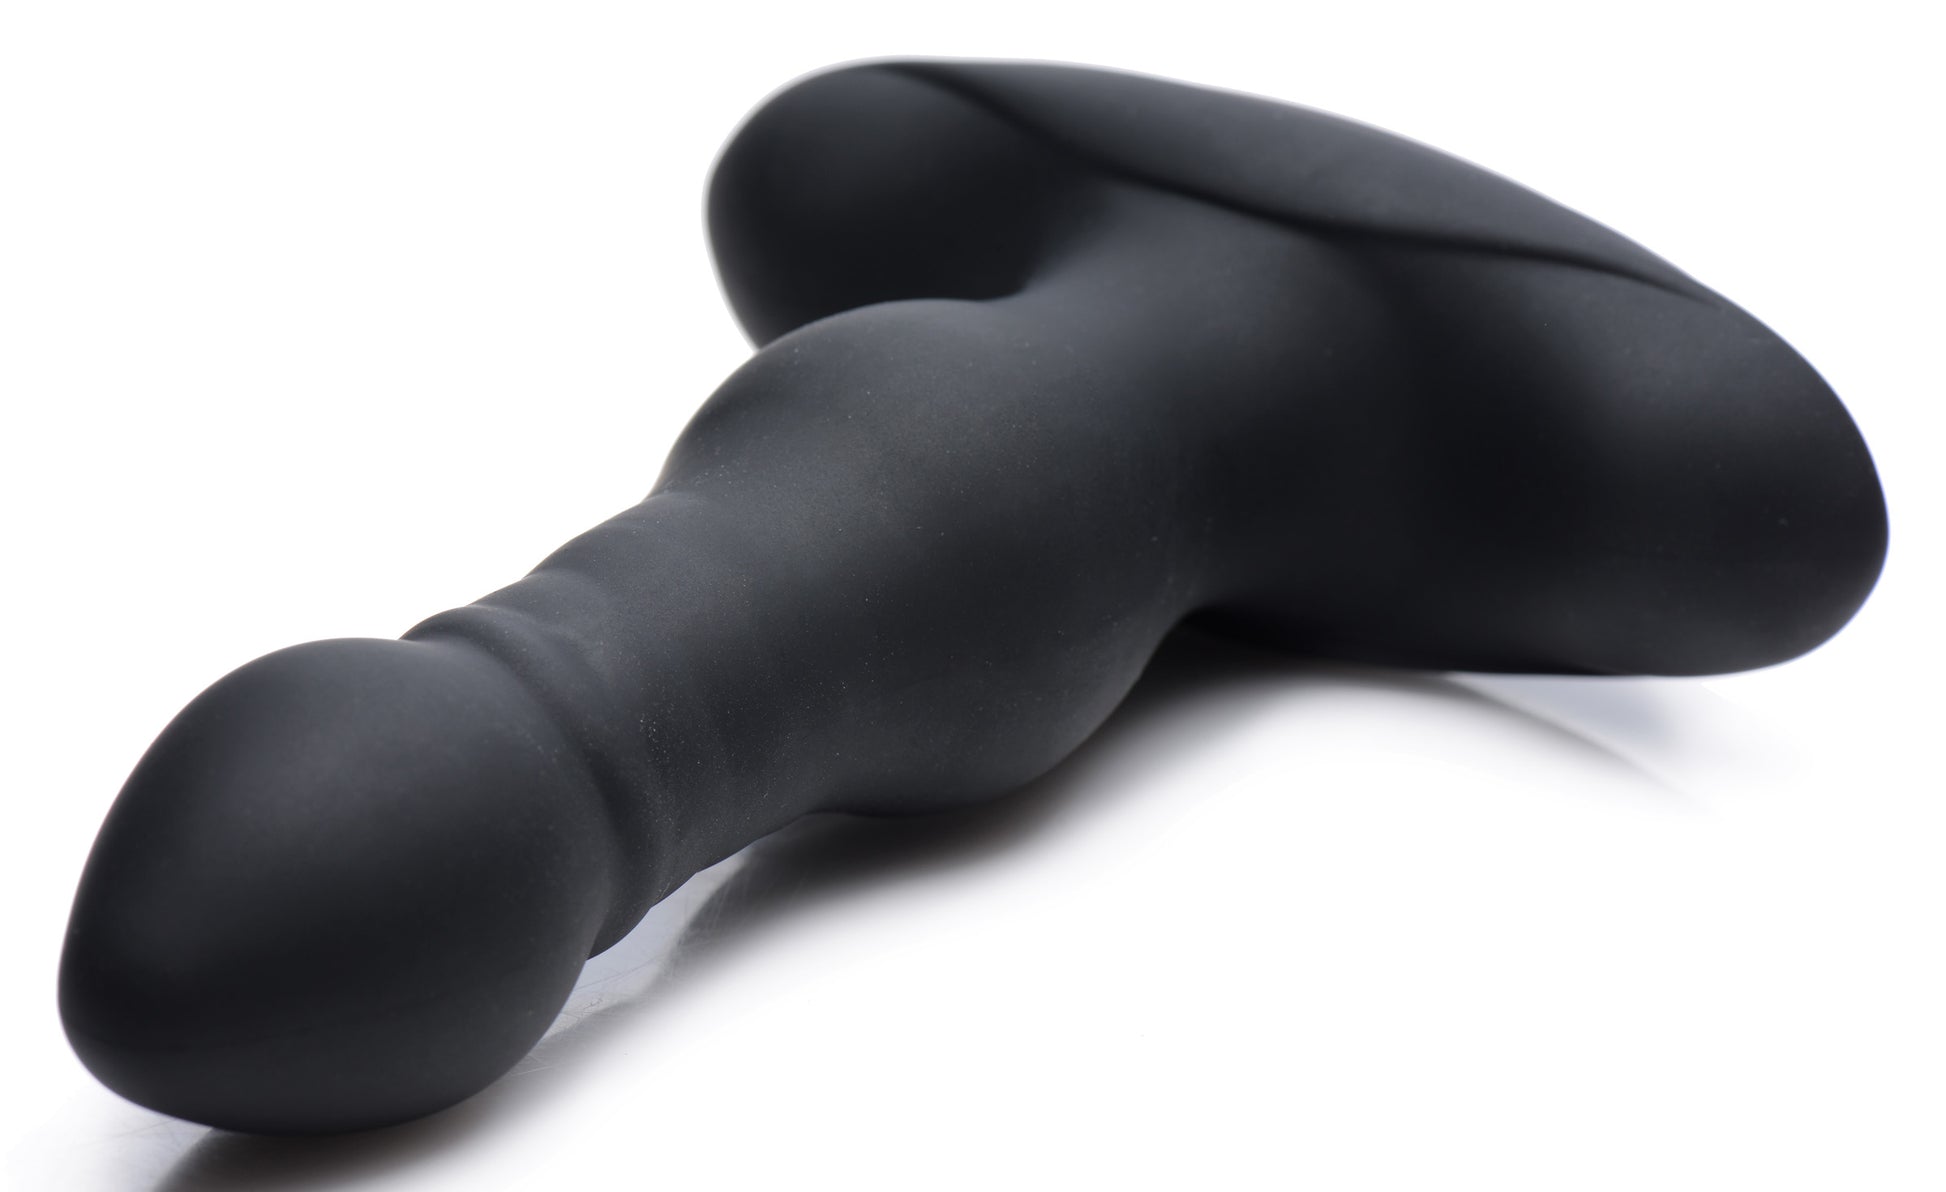 Vibrating and Thrusting Remote Control Silicone Anal Plug - UABDSM